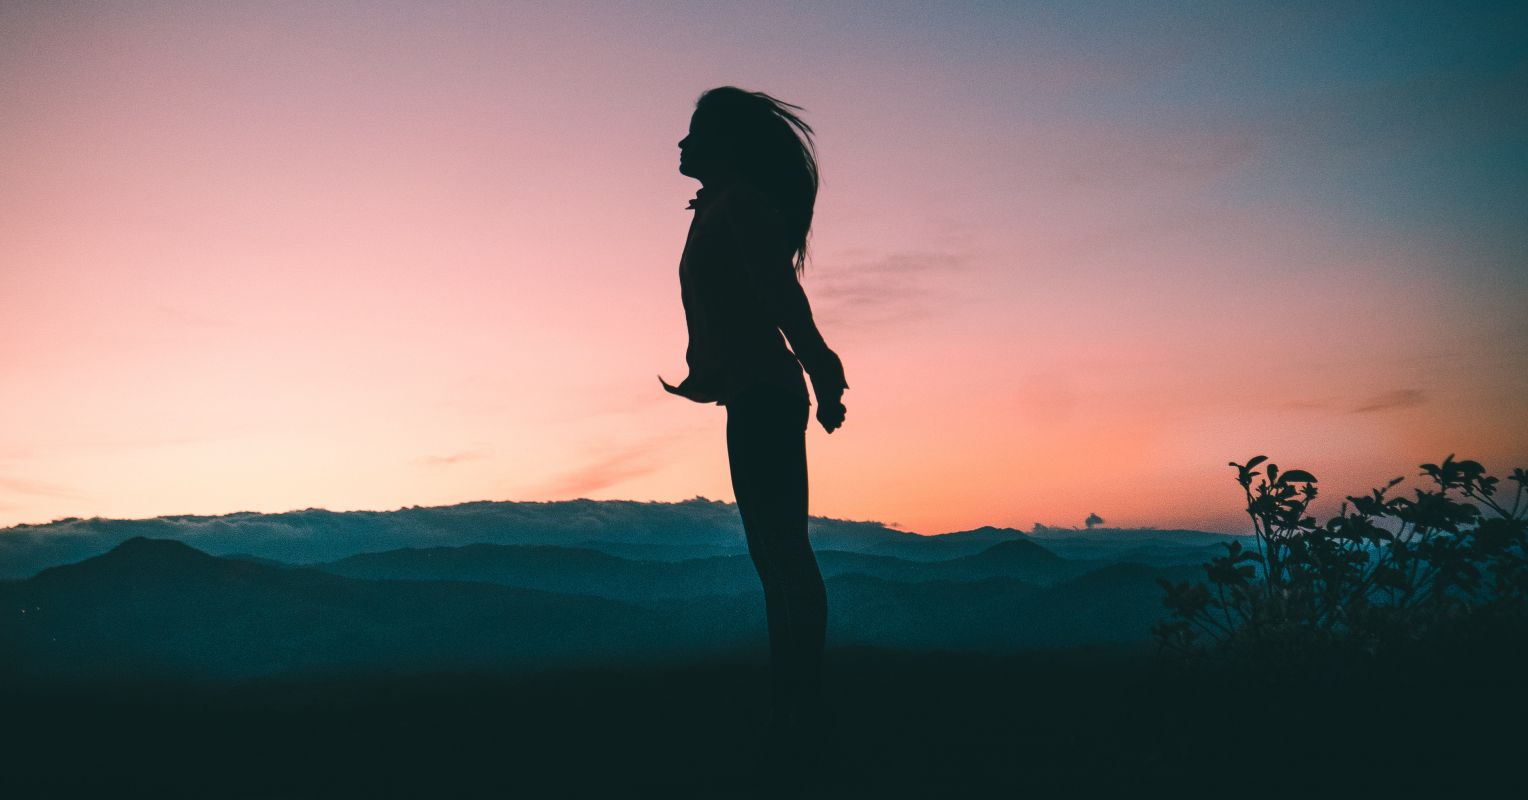 A person standing on top of a hill at sunset photo – Free Cape town Image  on Unsplash